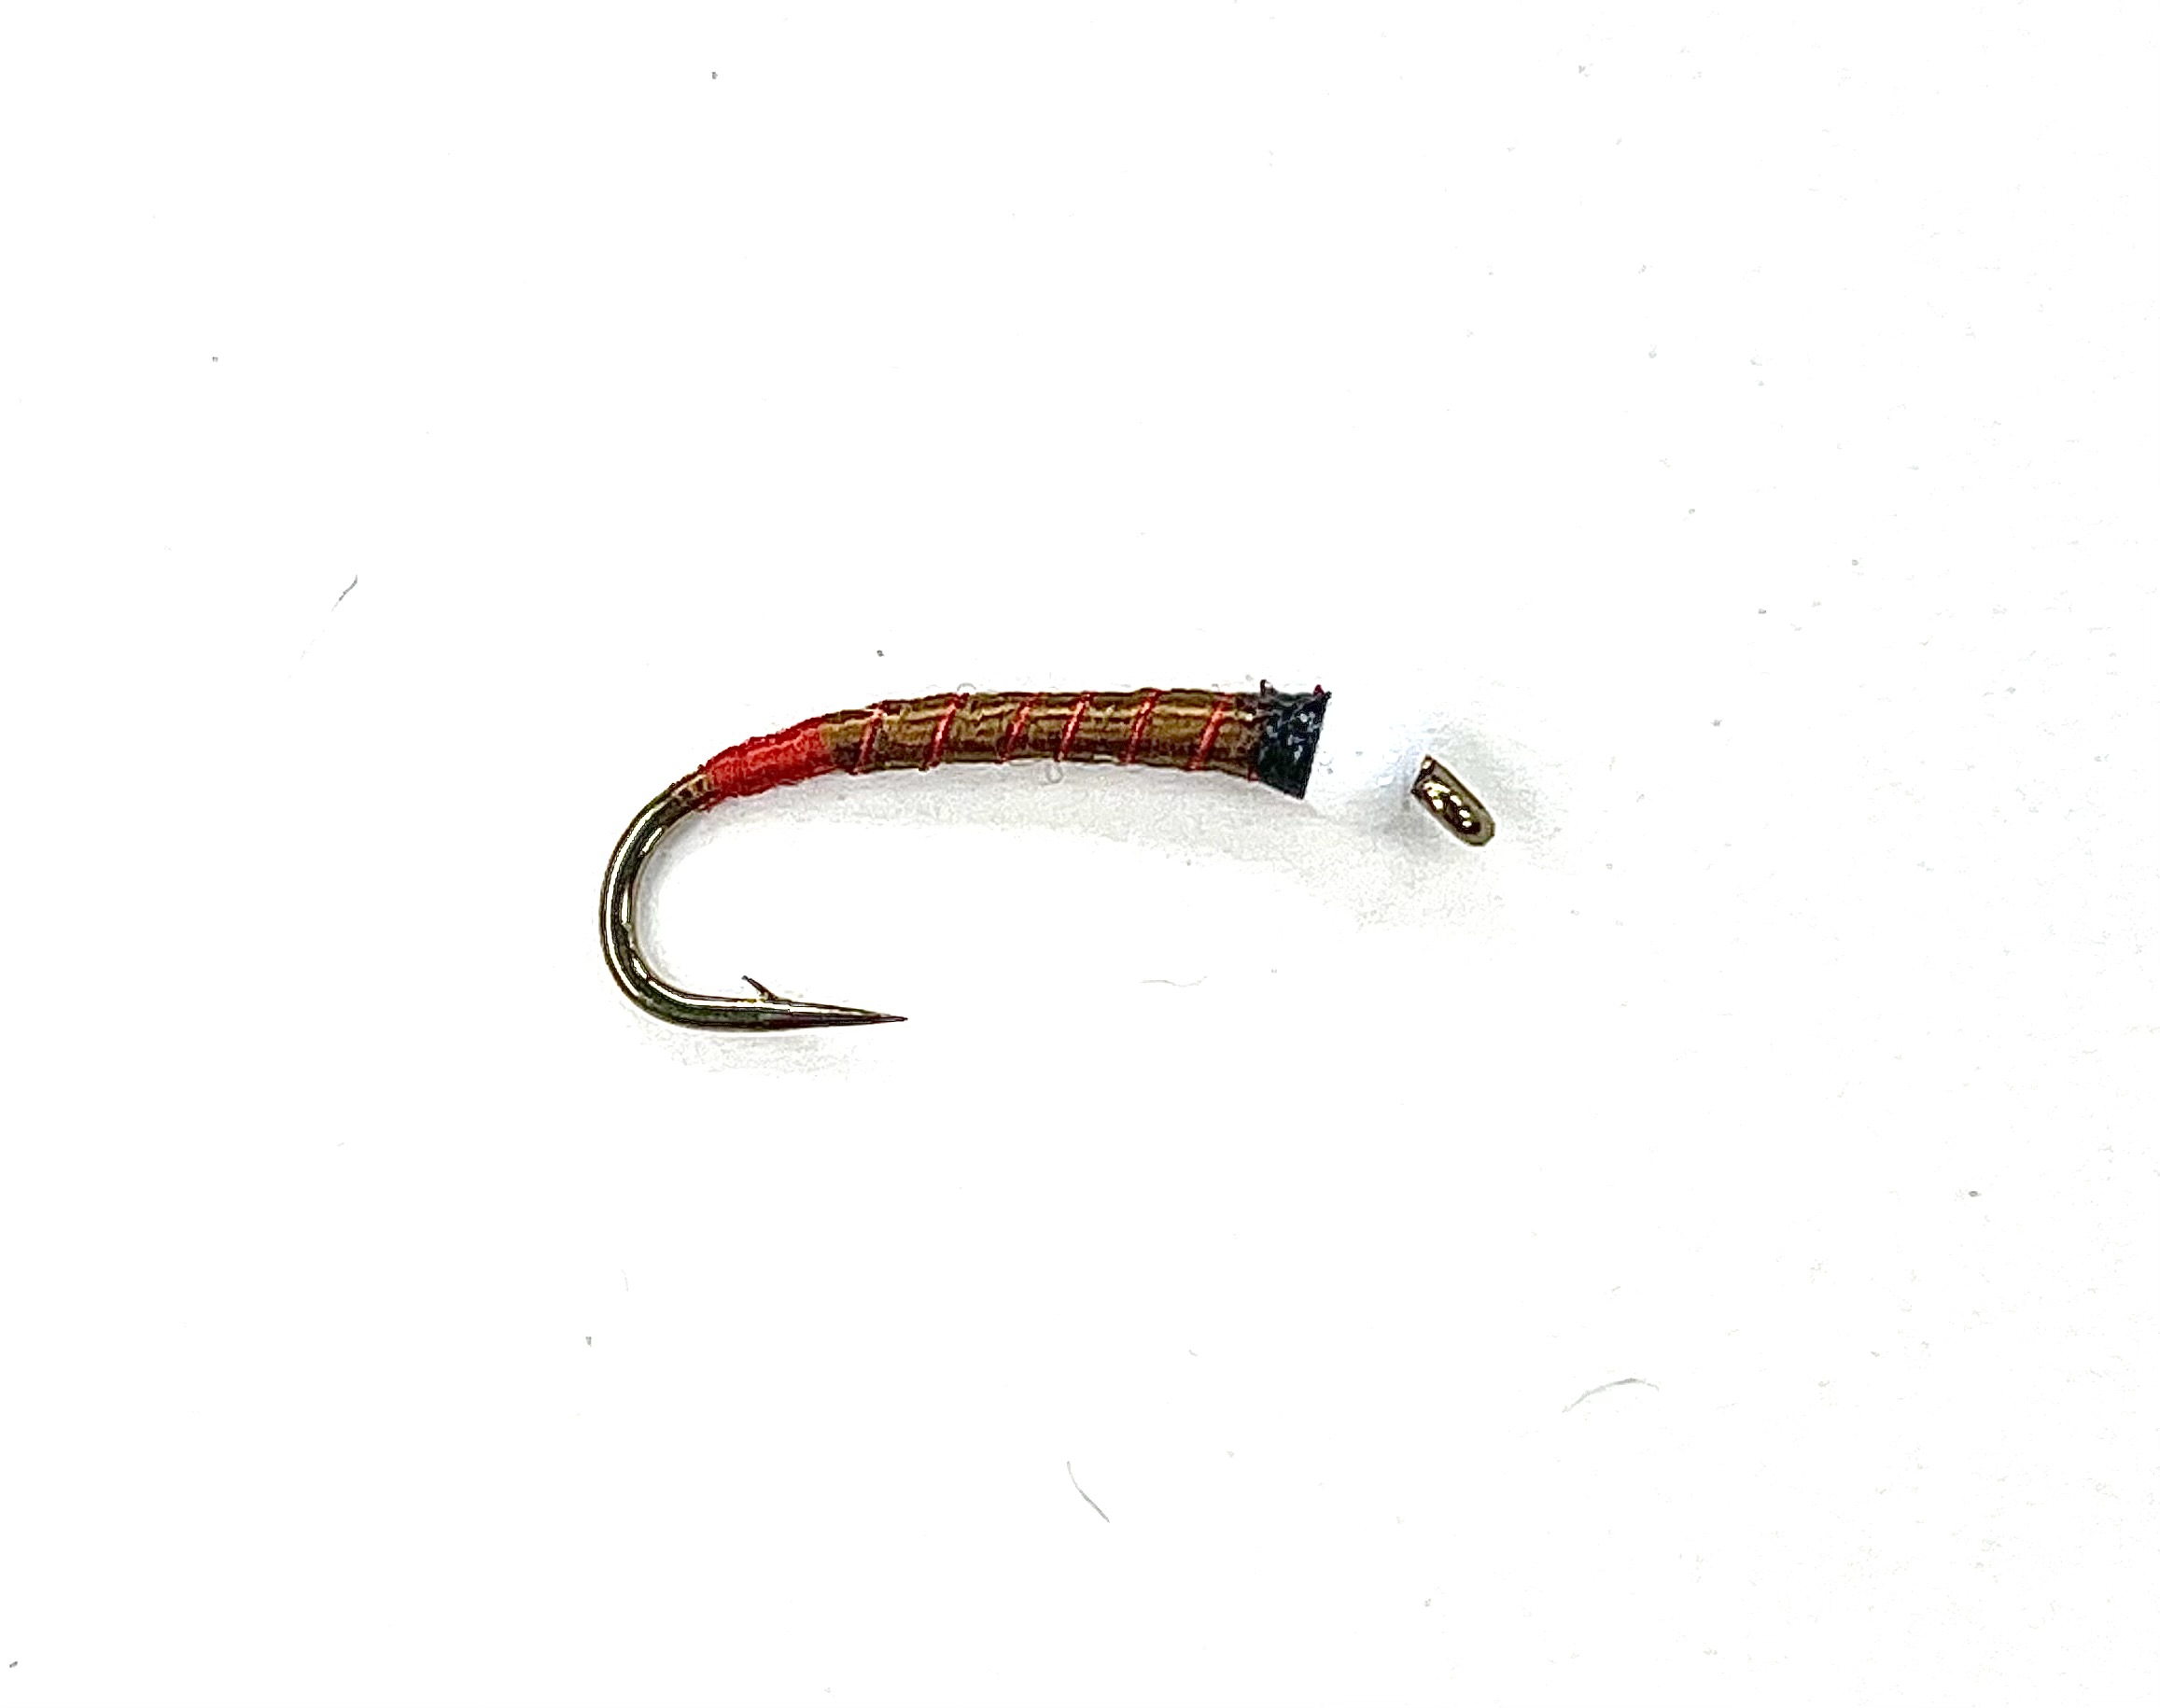 FAD Candy Cone Red Butt Chironomid - Brown/Red Wire - Size 14